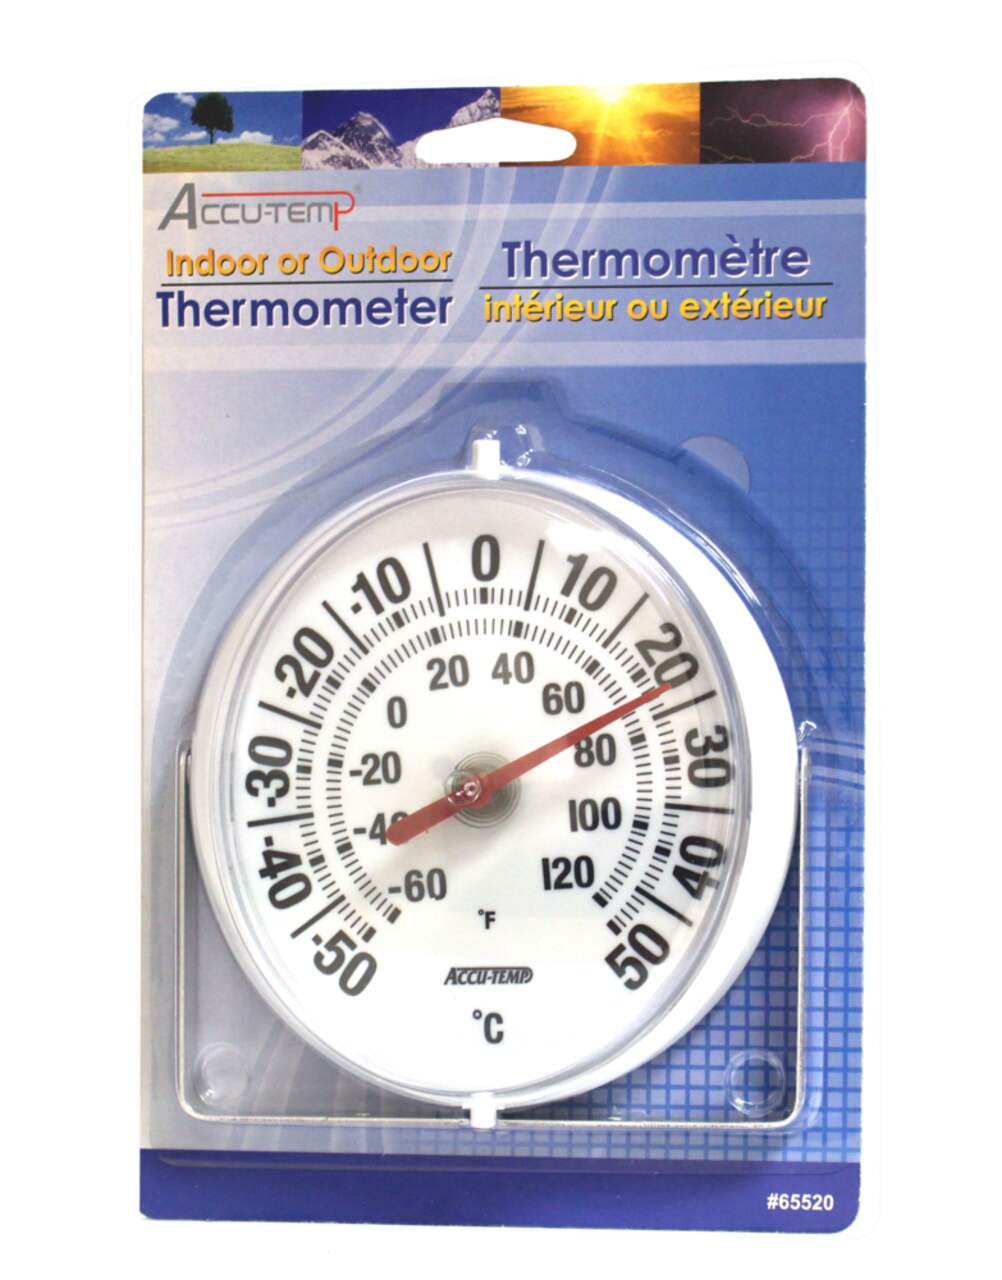 https://media-www.canadiantire.ca/product/living/kitchen/kitchen-tools-thermometers/0429124/5-5-round-indoor-outdoor-thermometer-eb4d02dd-6367-4fab-903b-5857a9020e30.png?imdensity=1&imwidth=1244&impolicy=mZoom